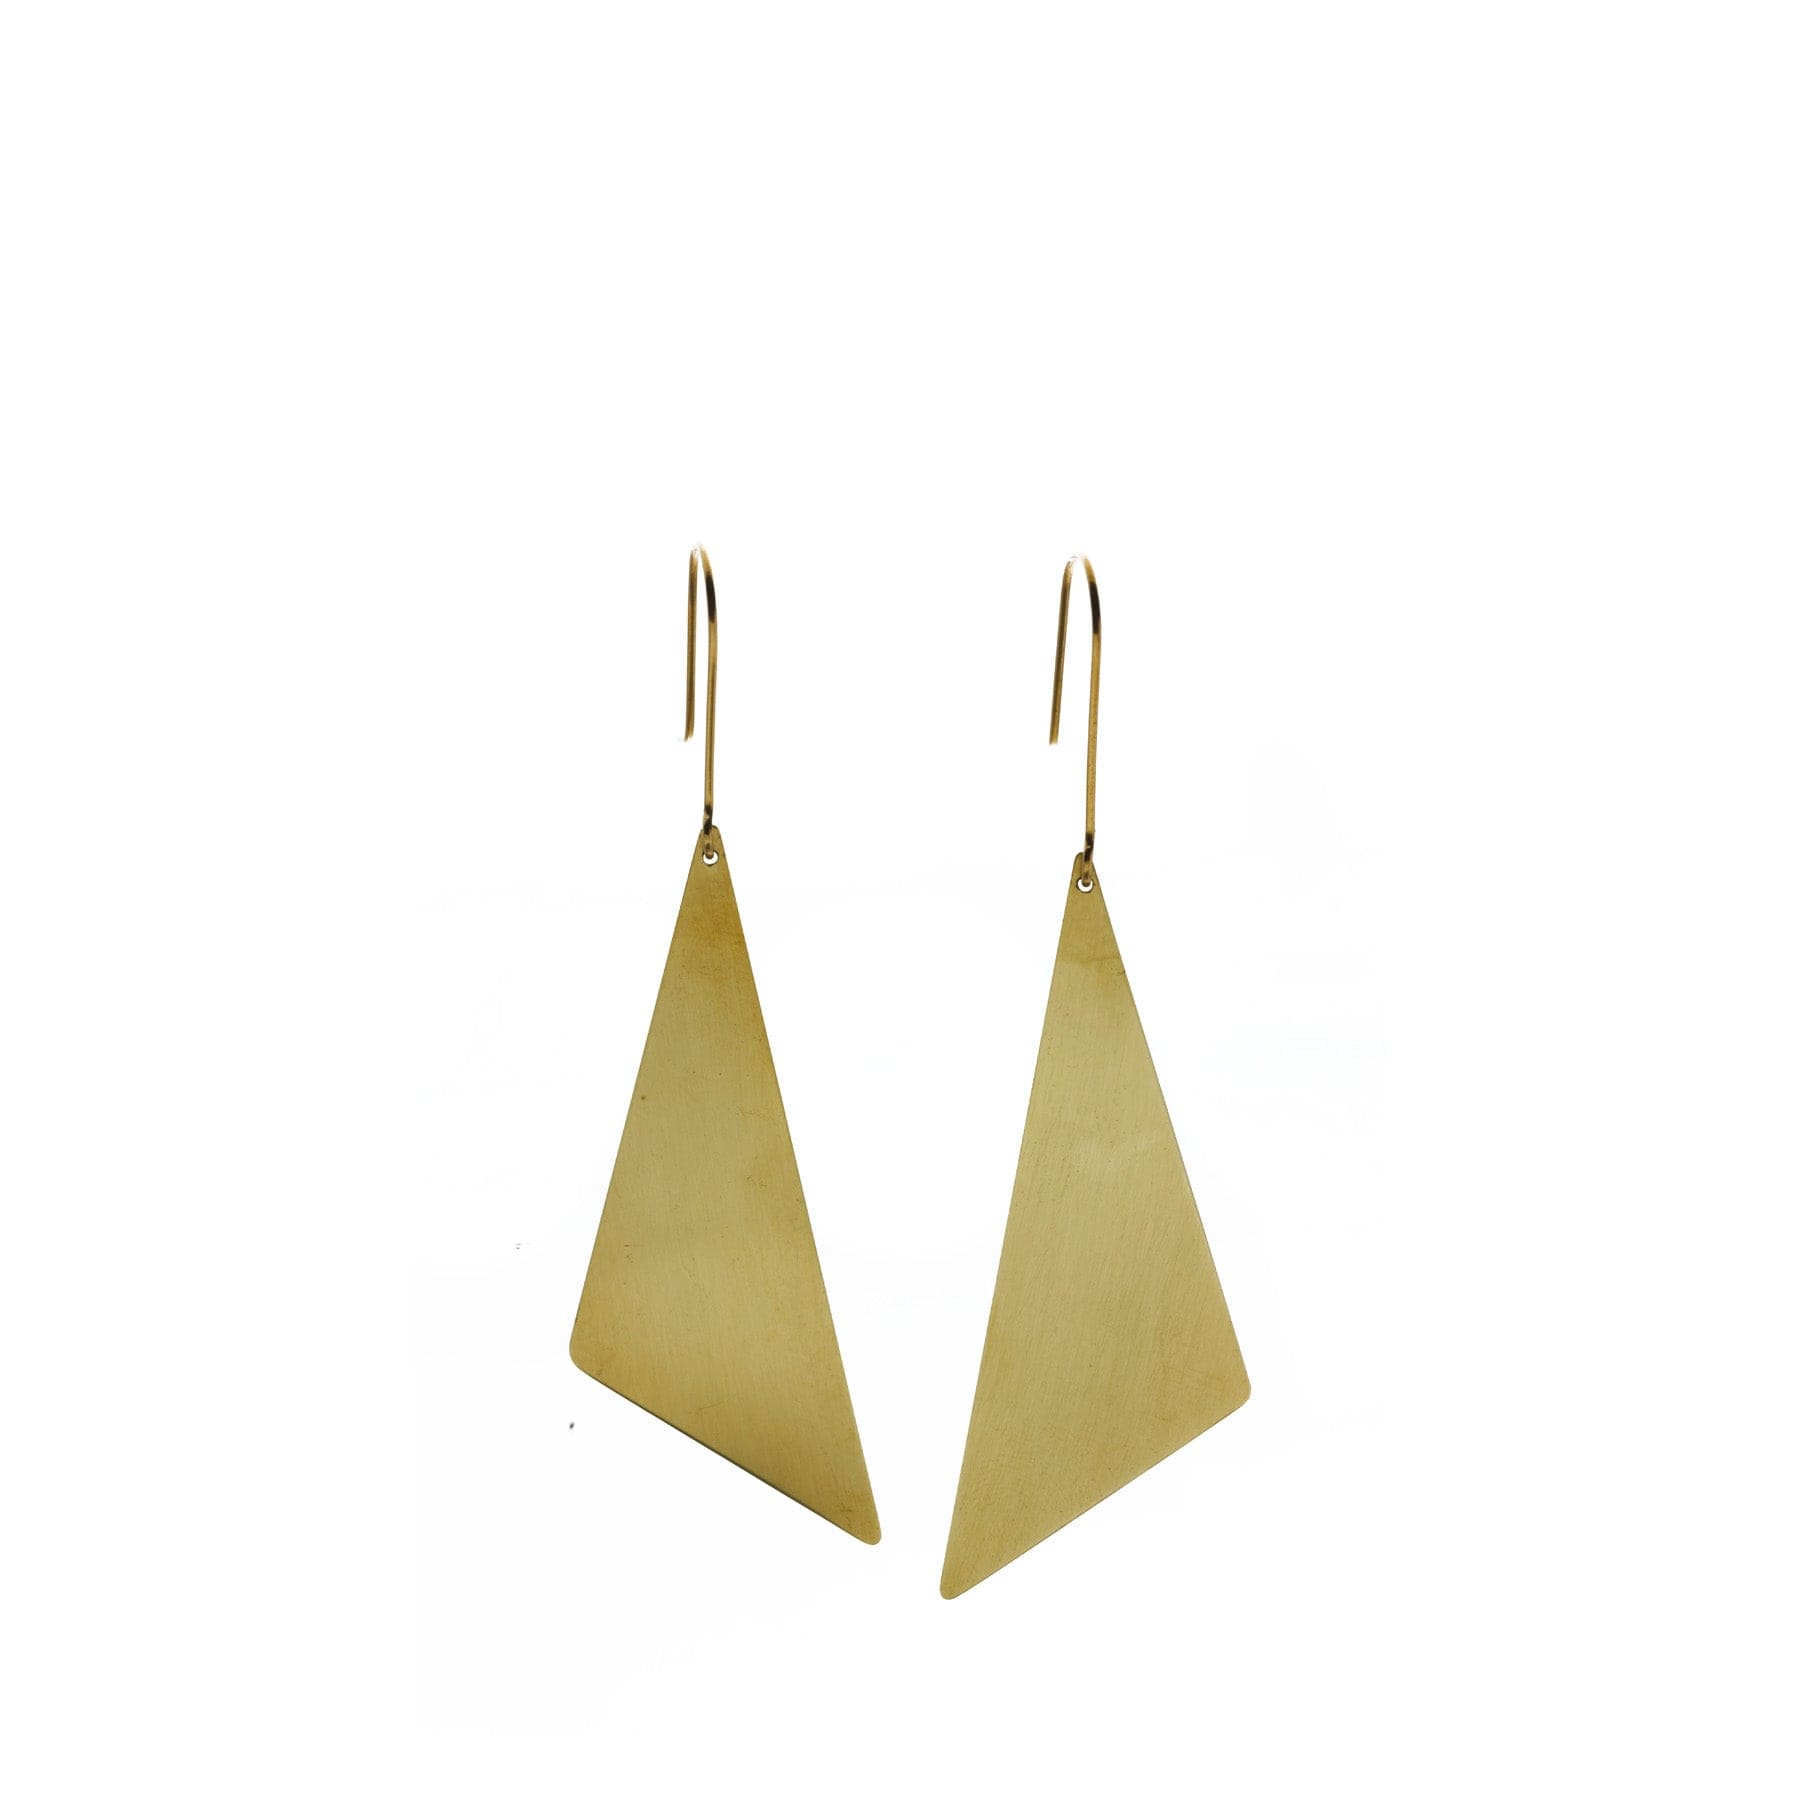 Offset triangle earrings